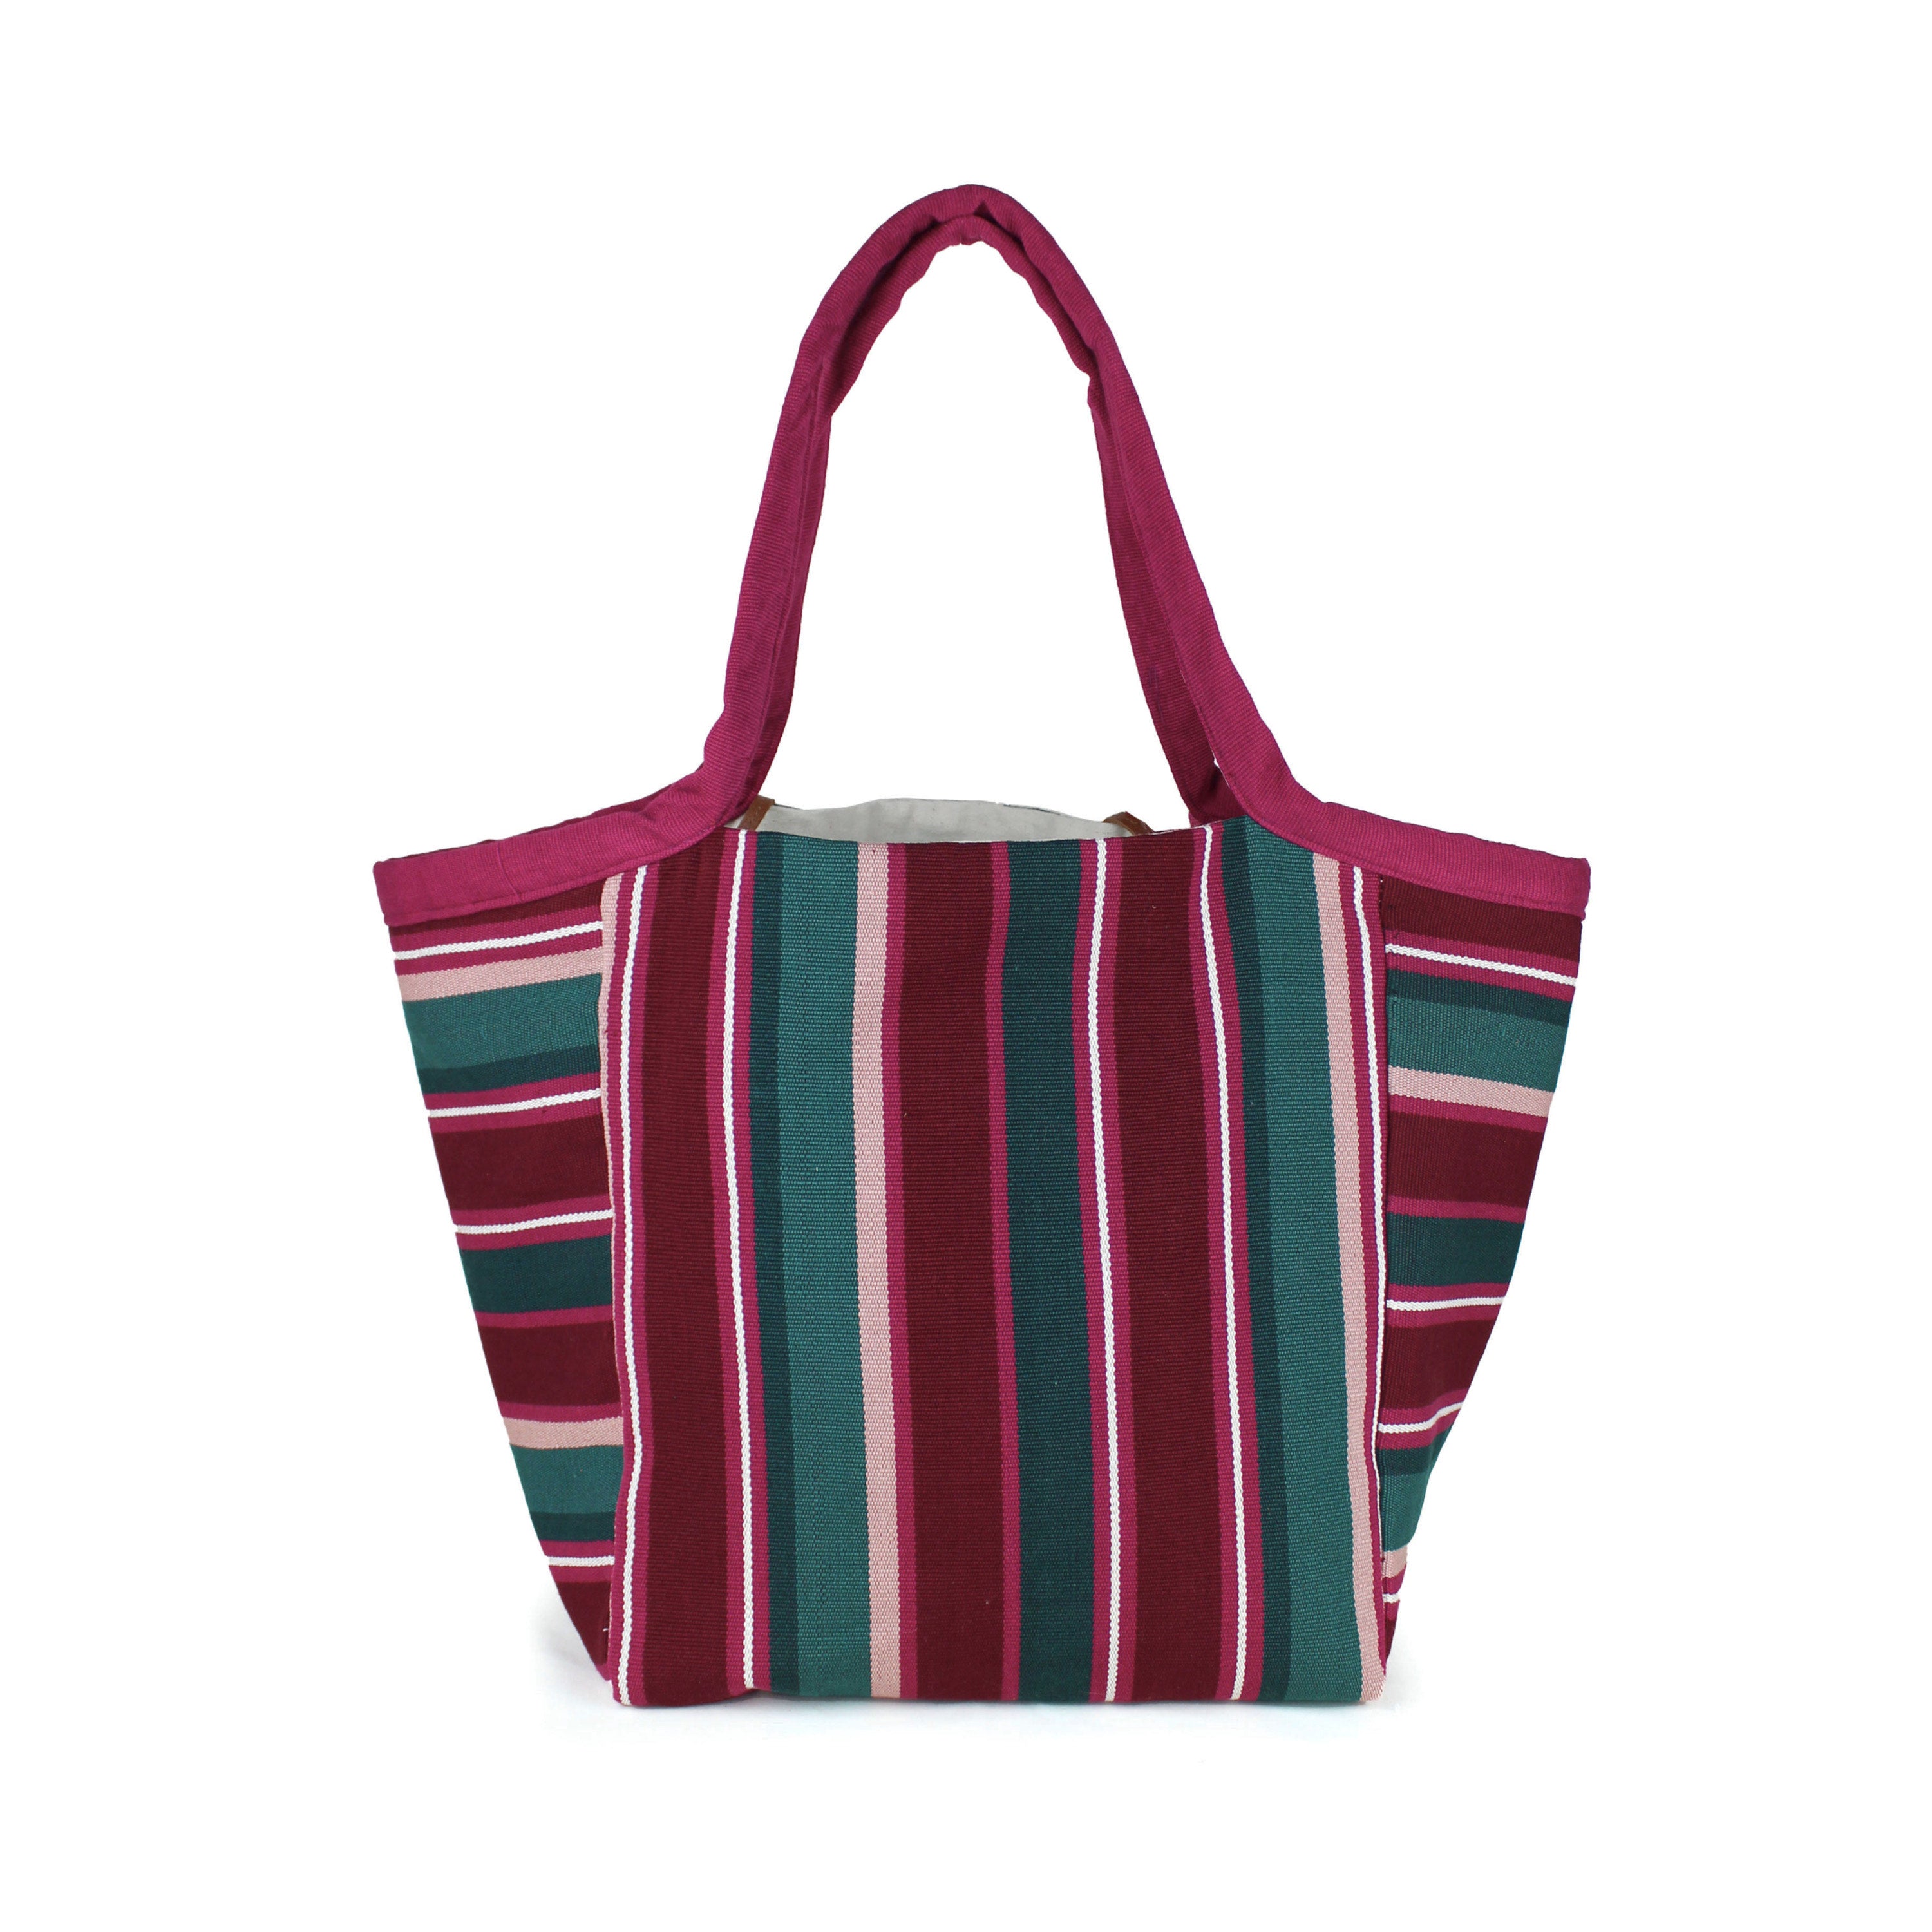 A back view of the hand woven artisan Rosa Tote. It has horizontal and vertical stripes in magenta, maroon, green, and white.